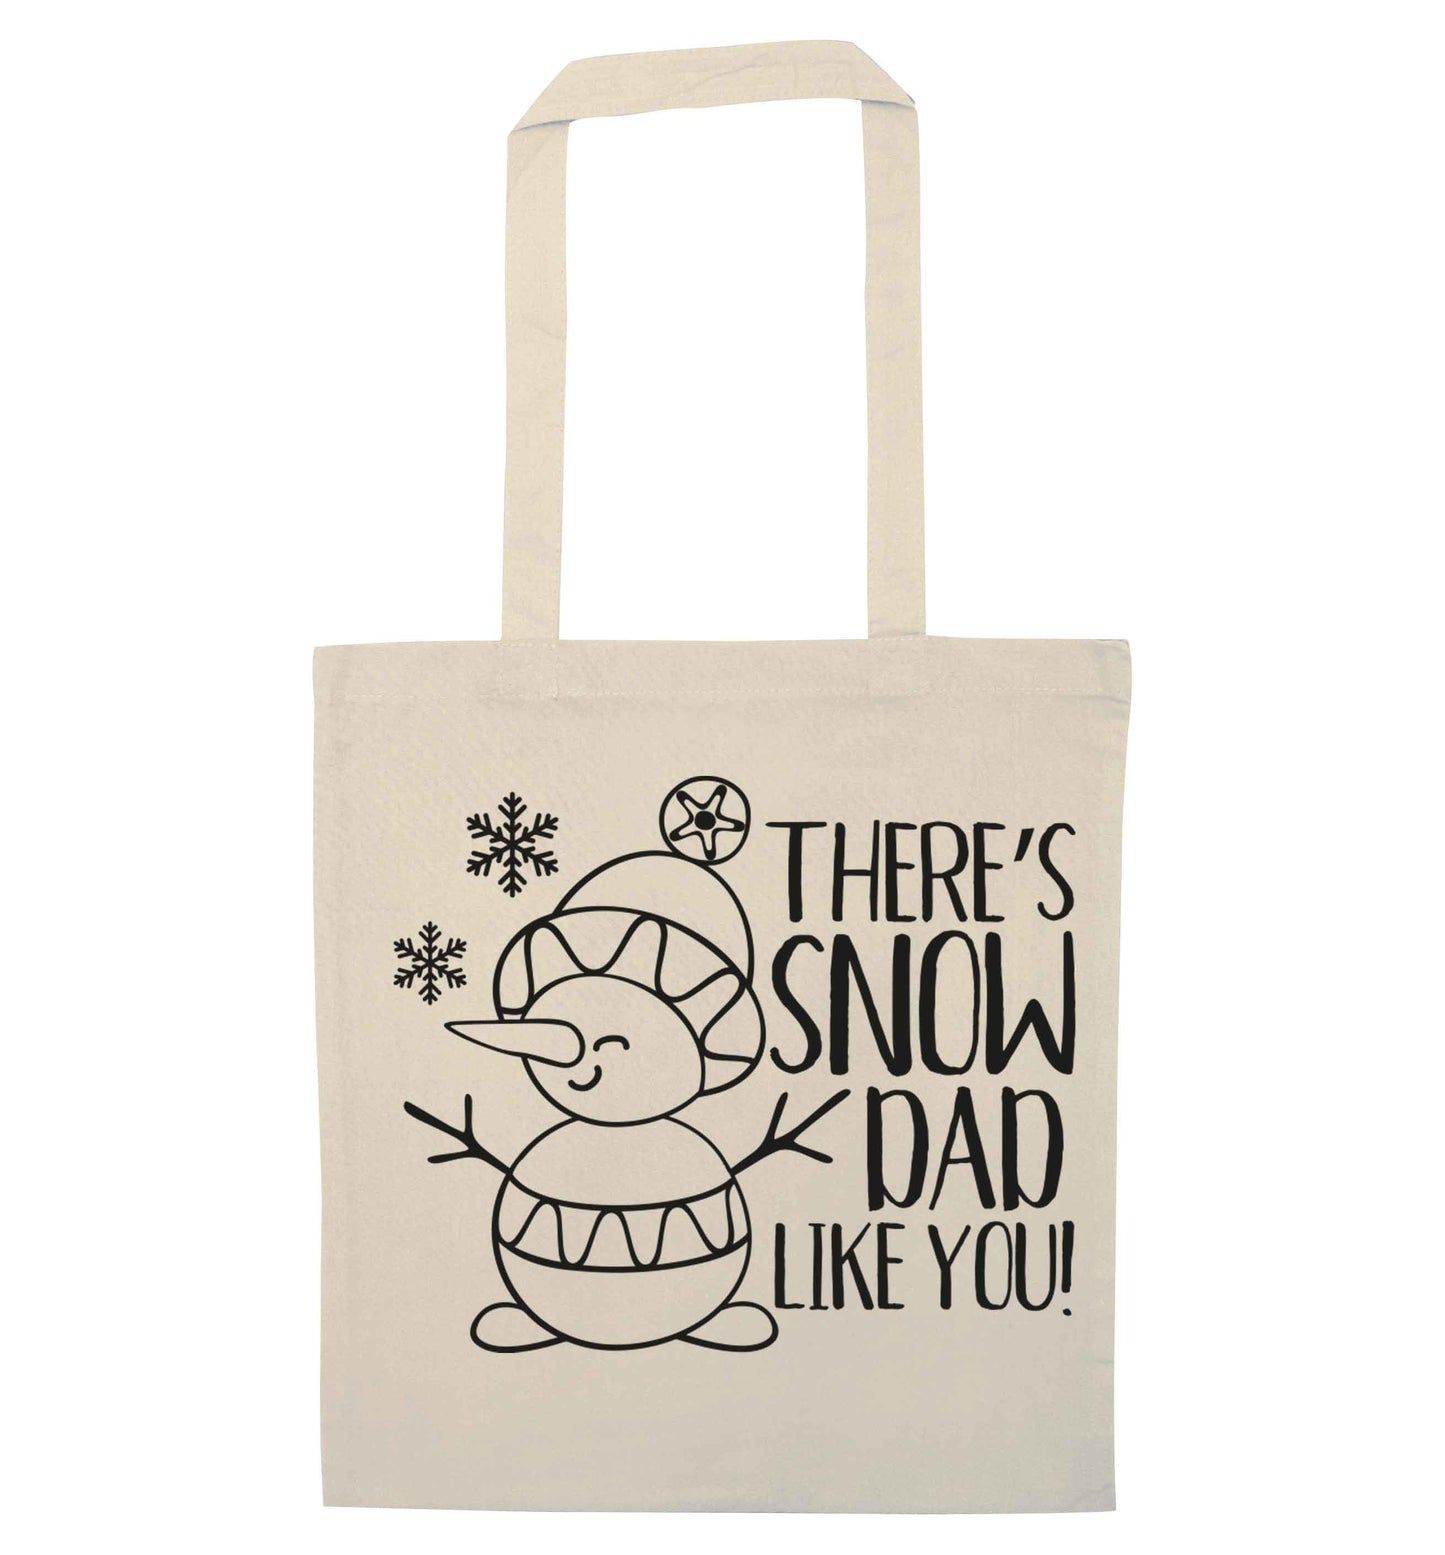 There's snow dad like you natural tote bag